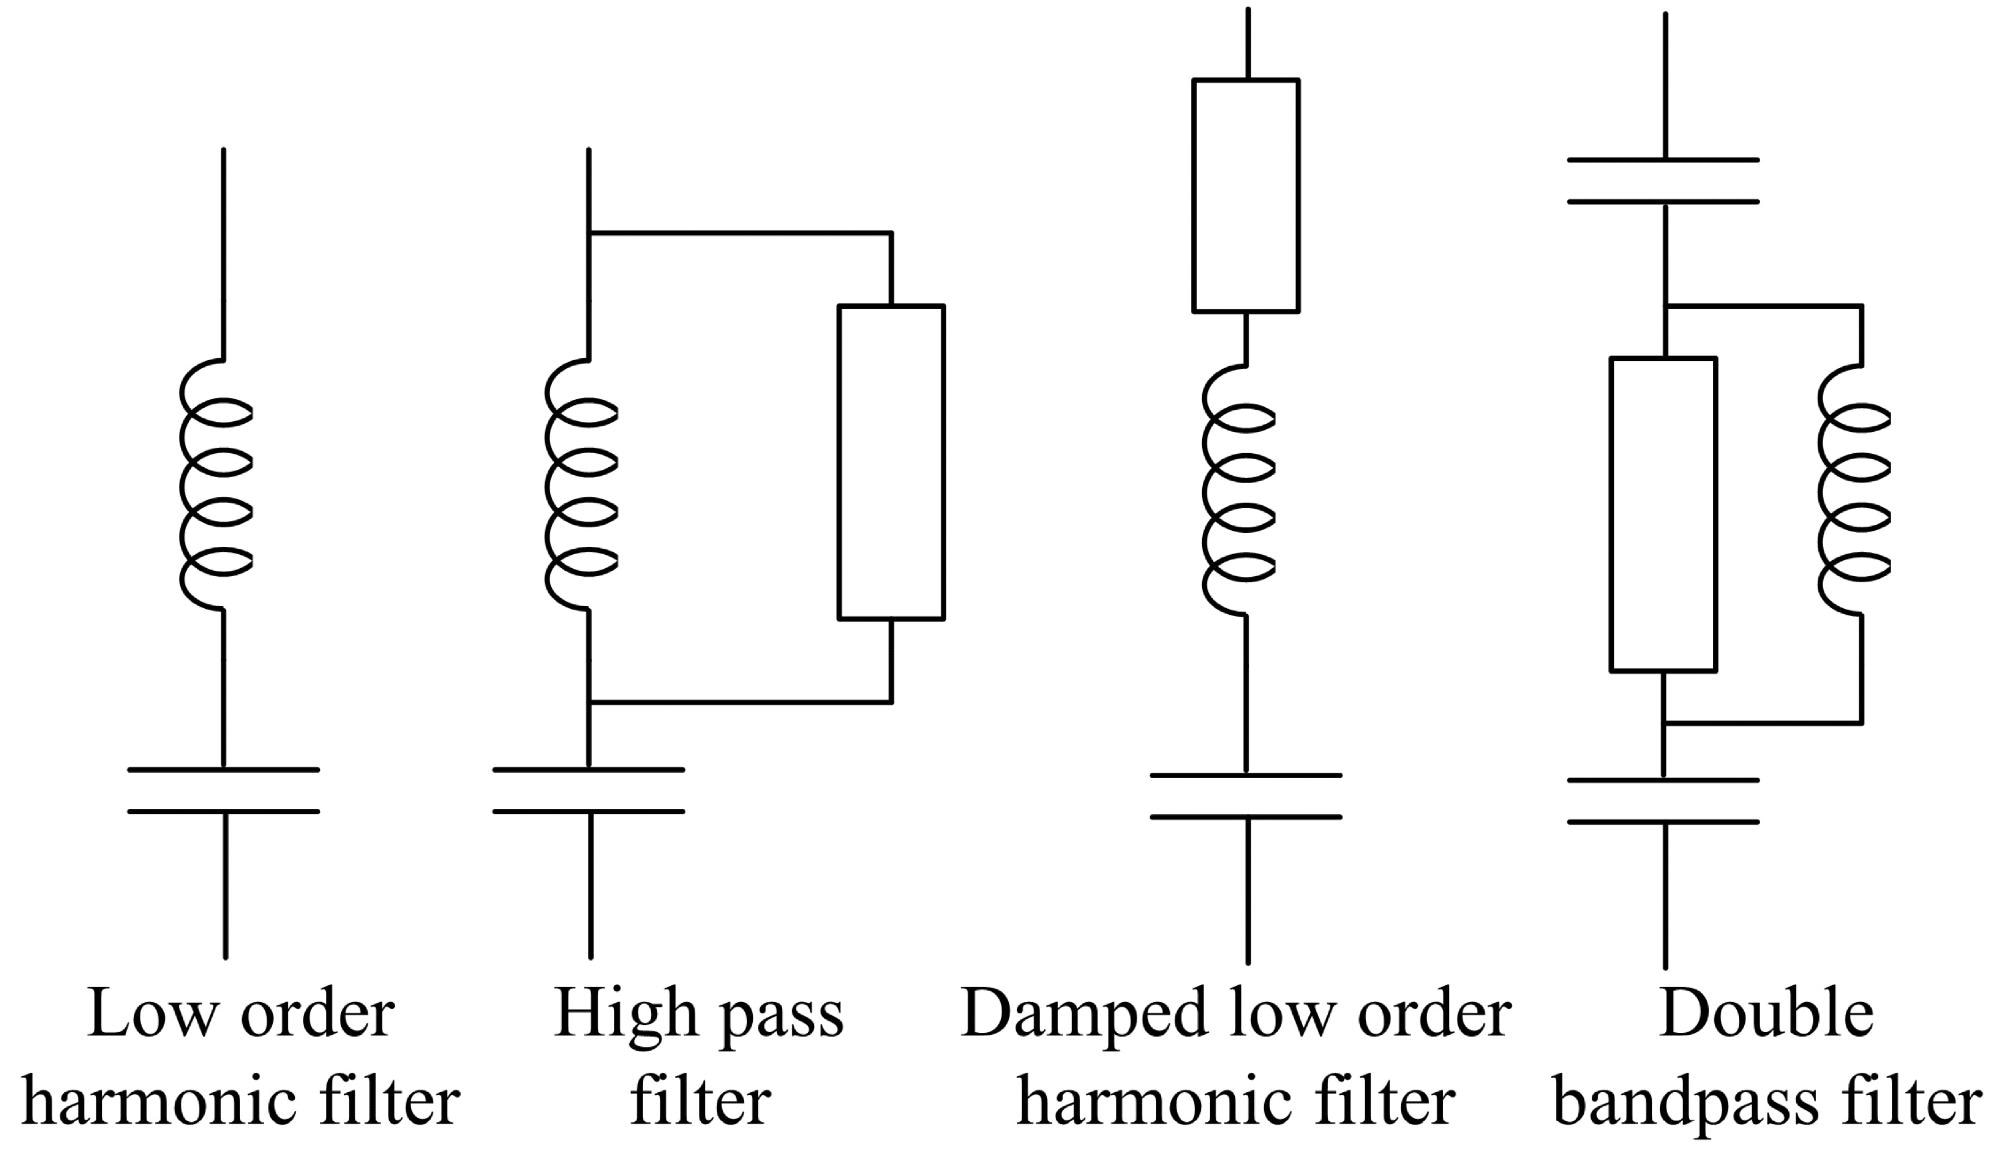 Possible filter arrangements—low pass filter most suitable in this application.